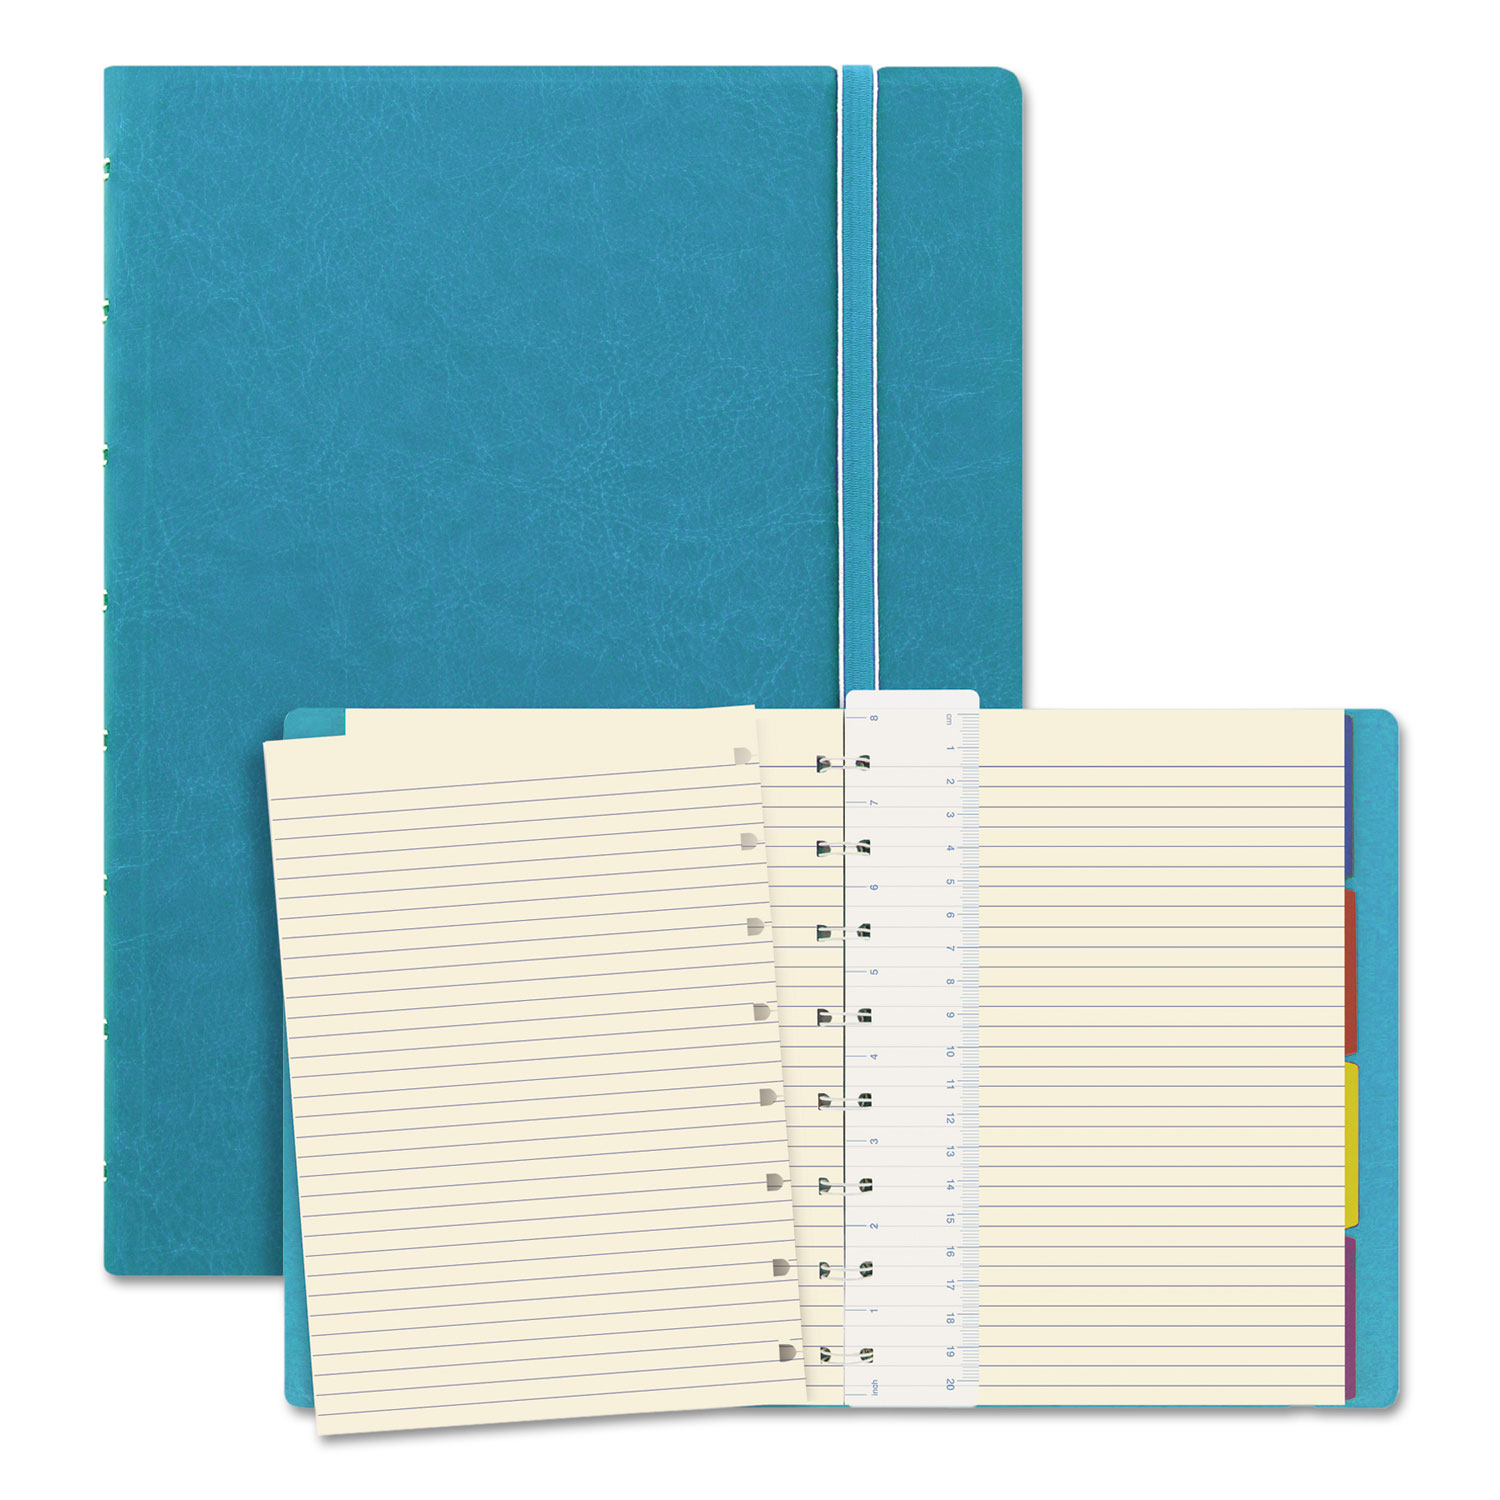 Notebook, 1 Subject, Medium/College Rule, Aqua Cover, 8.25 x 5.81, 112 Pages